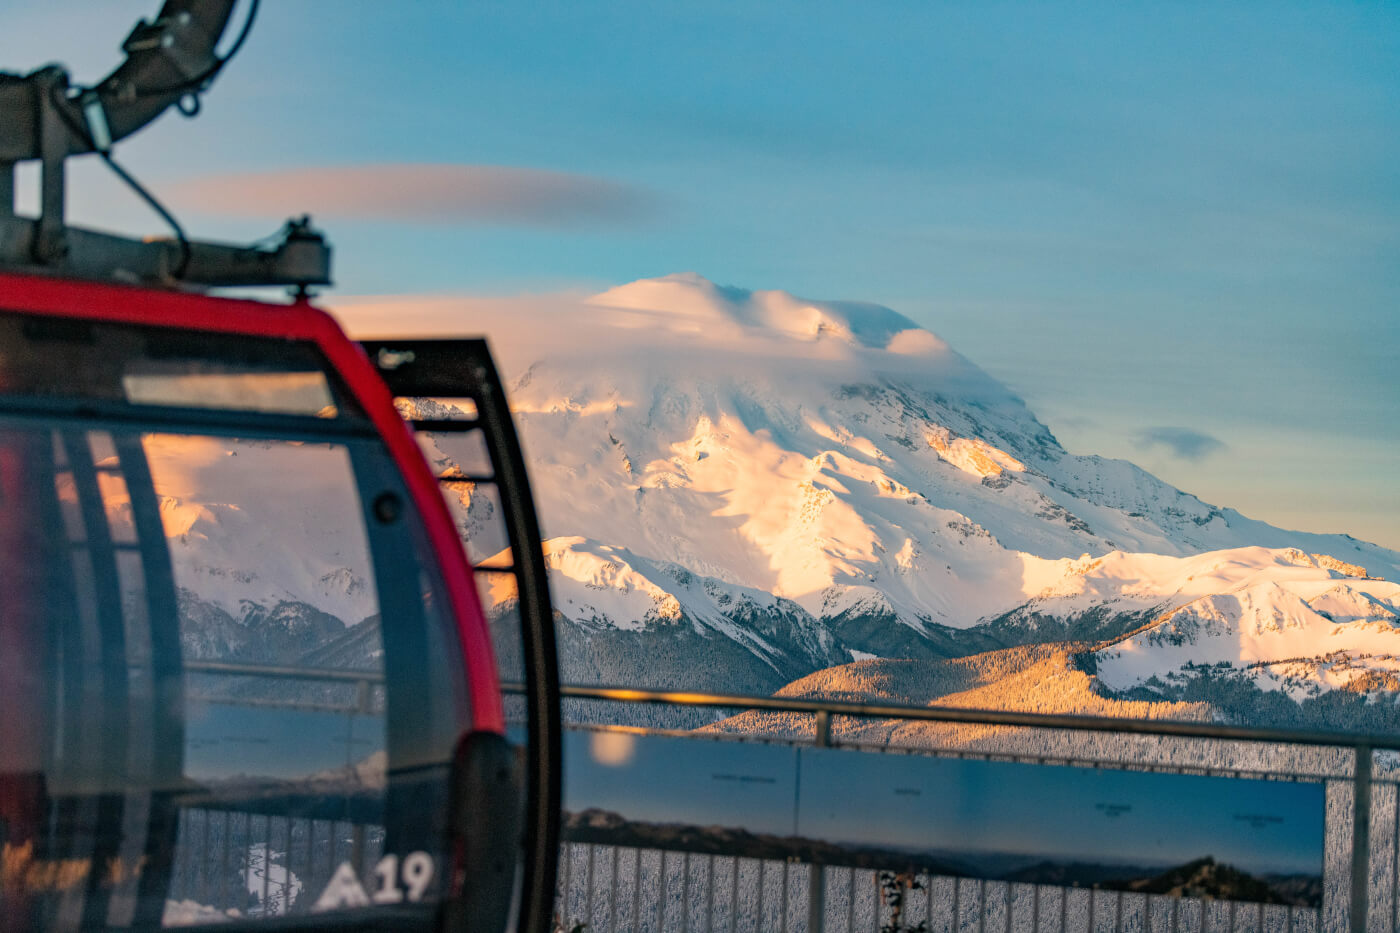 View of the Cascade Mountain's from the gondola, a perfect selfie spot.